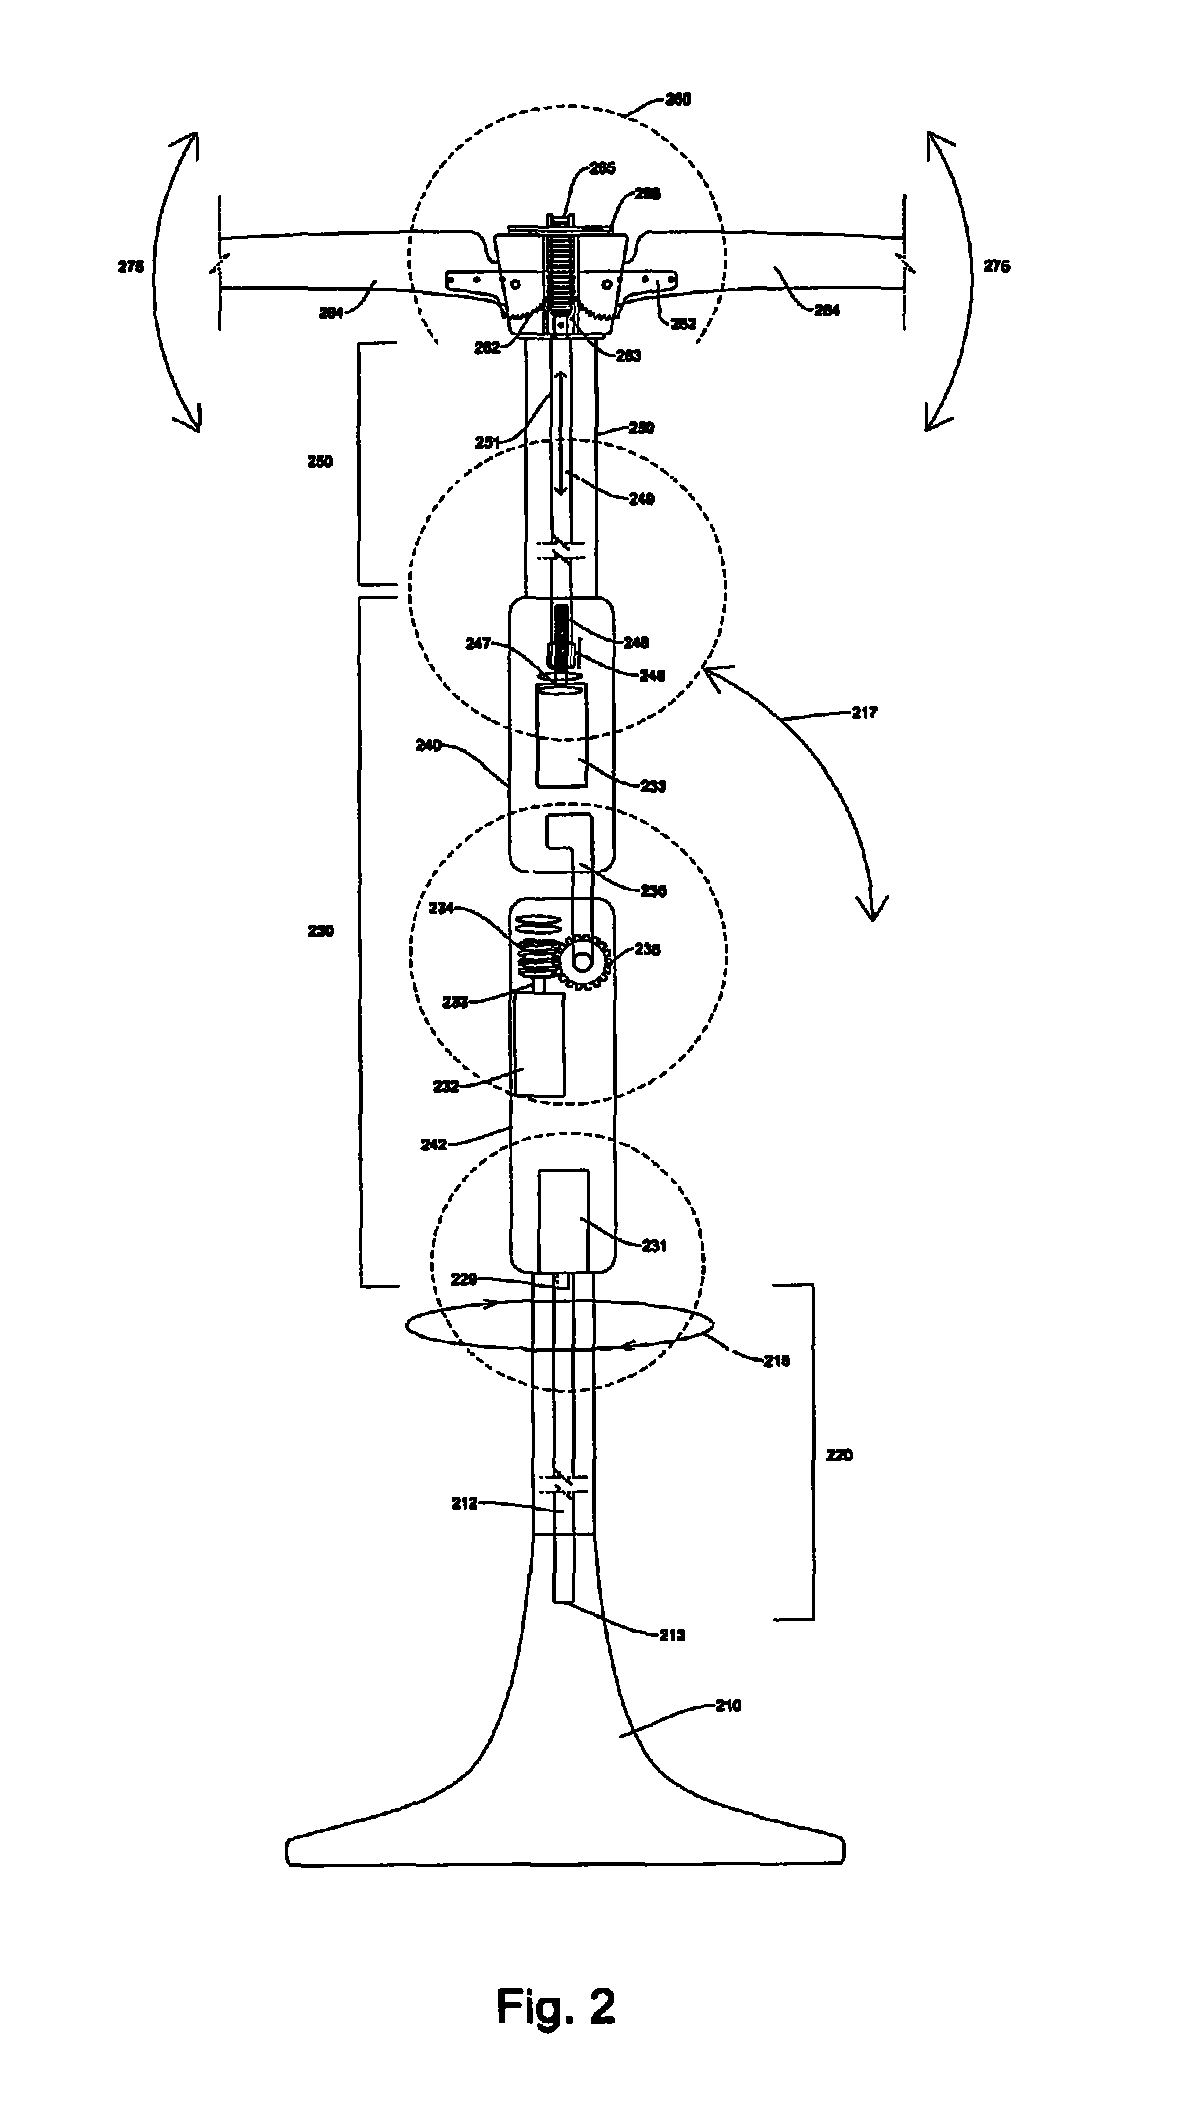 Shading system with artificial intelligence application programming interface